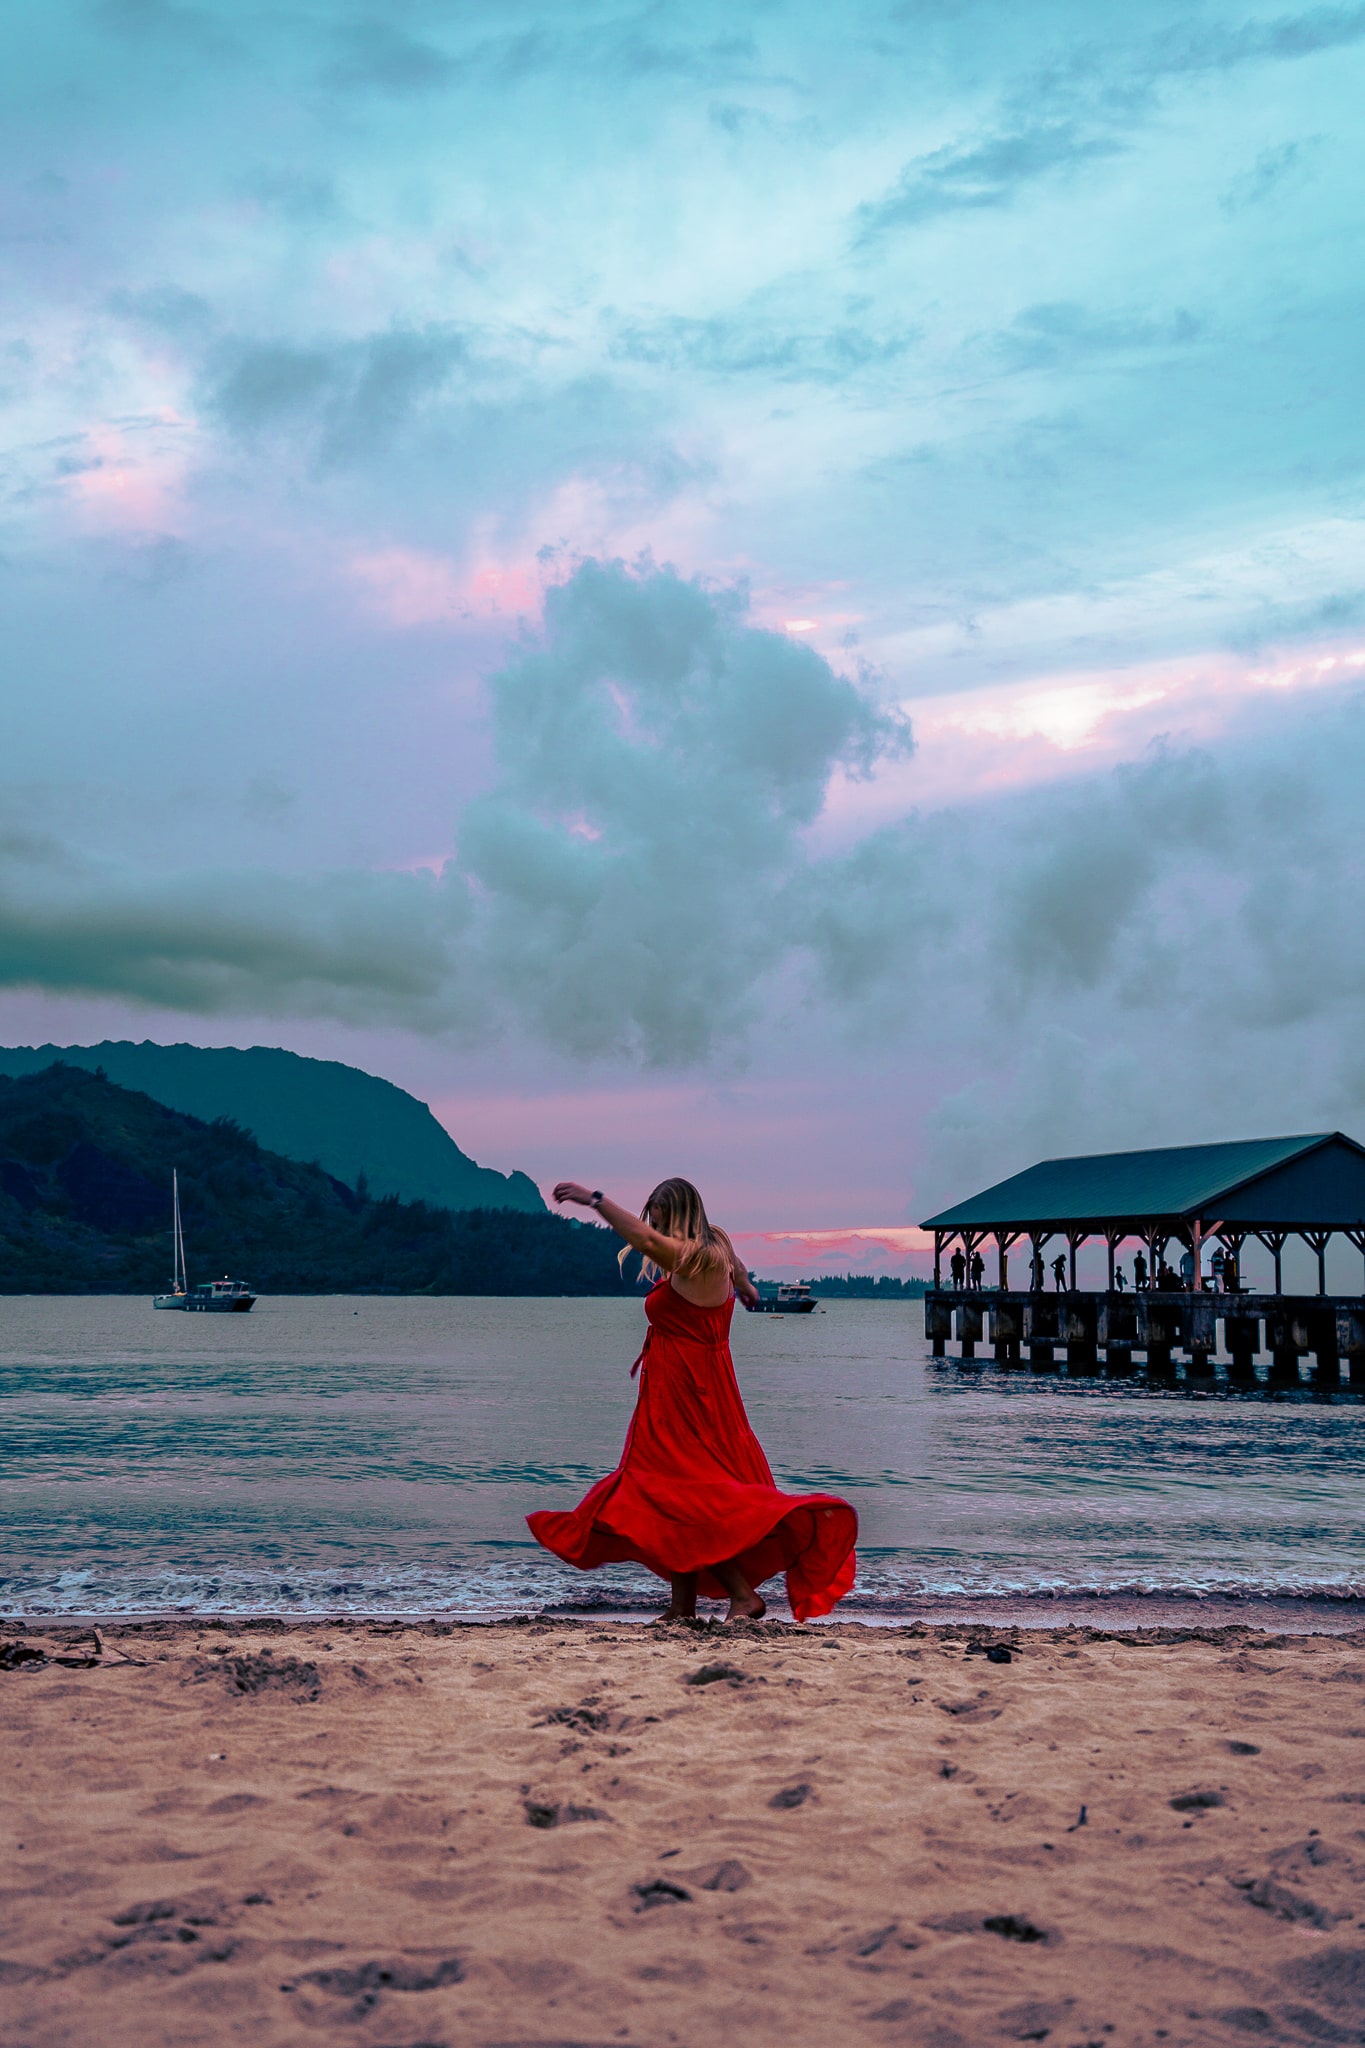 Woman spinning on the beach with her dress flowing at sunset at Hanalei Bay